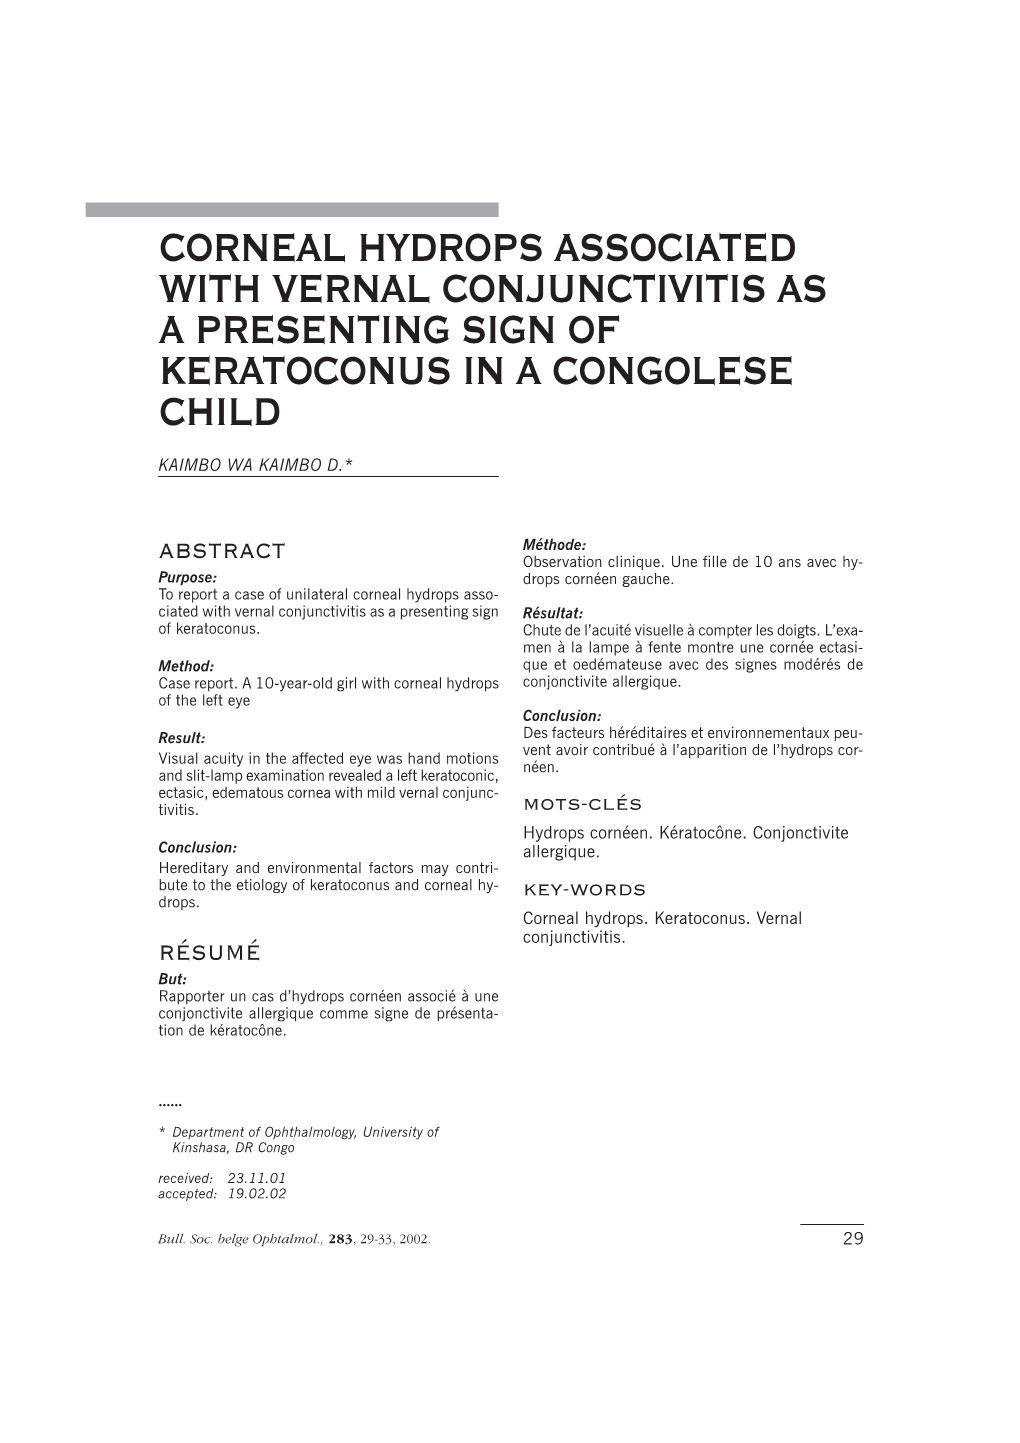 Corneal Hydrops Associated with Vernal Conjunctivitis As a Presenting Sign of Keratoconus in a Congolese Child